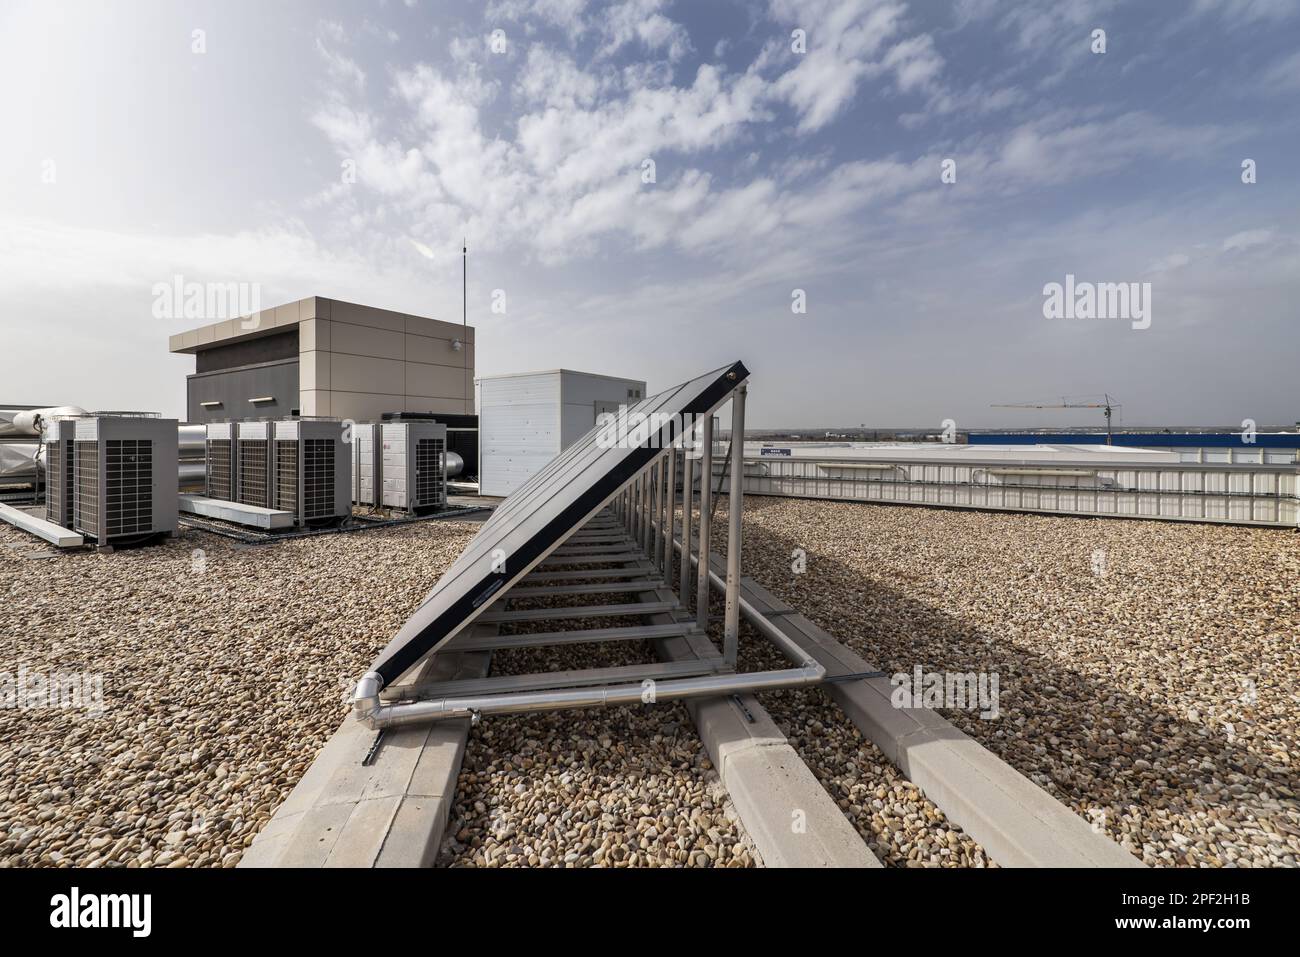 A solar panel to heat water on the roof of an industrial warehouse with gravel Stock Photo